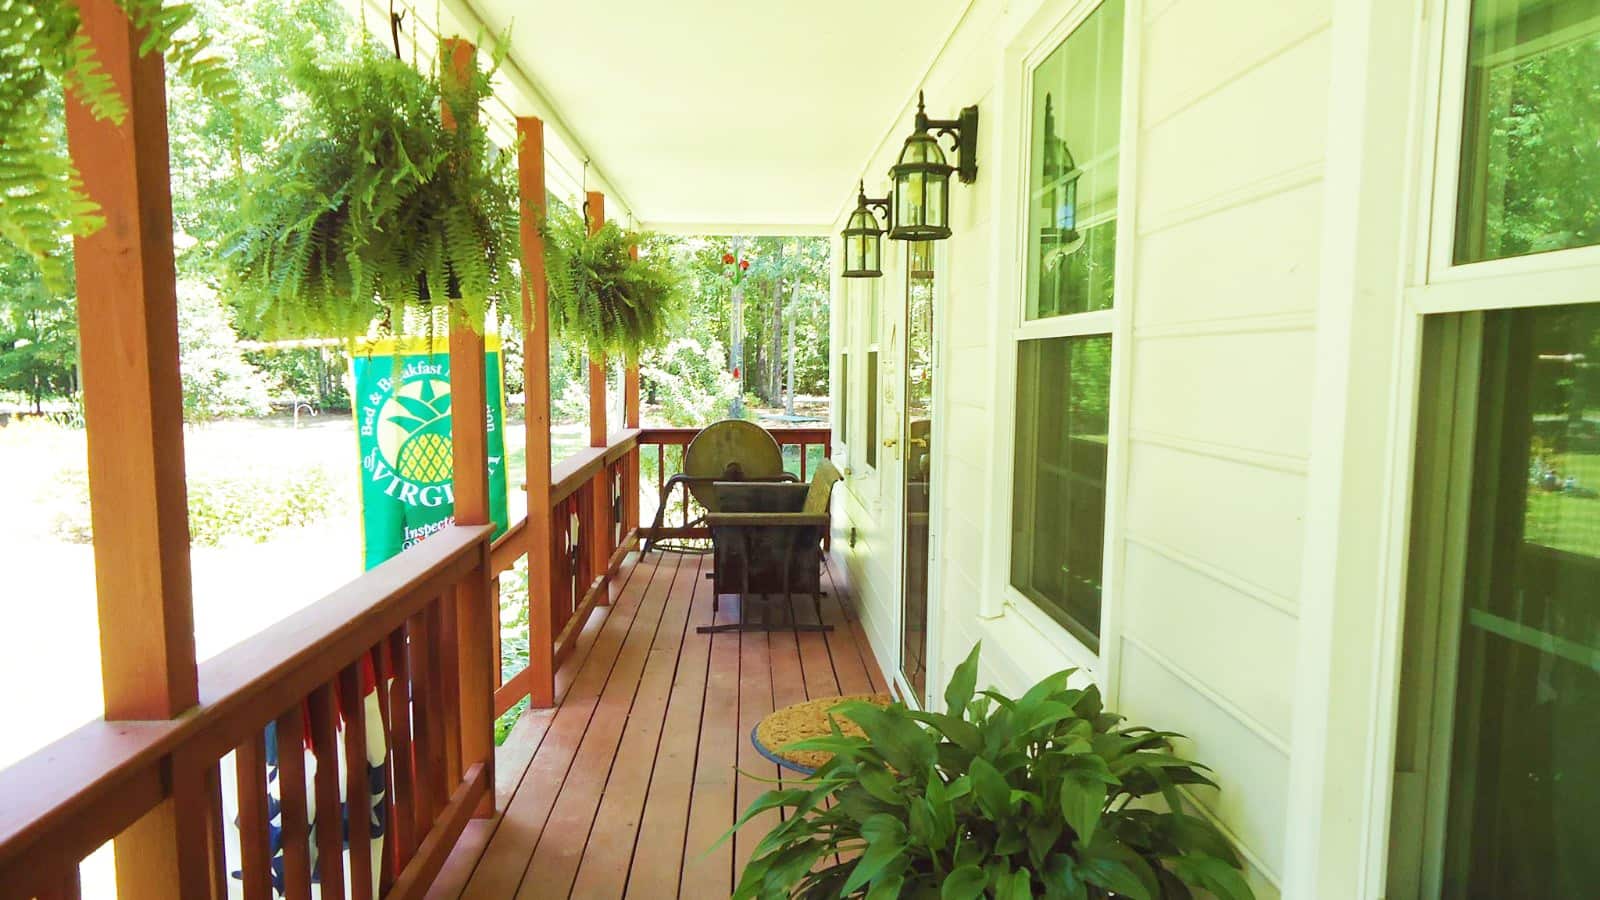 Wooden front porch of property with a patio chair, potted plant, and hanging fern plants